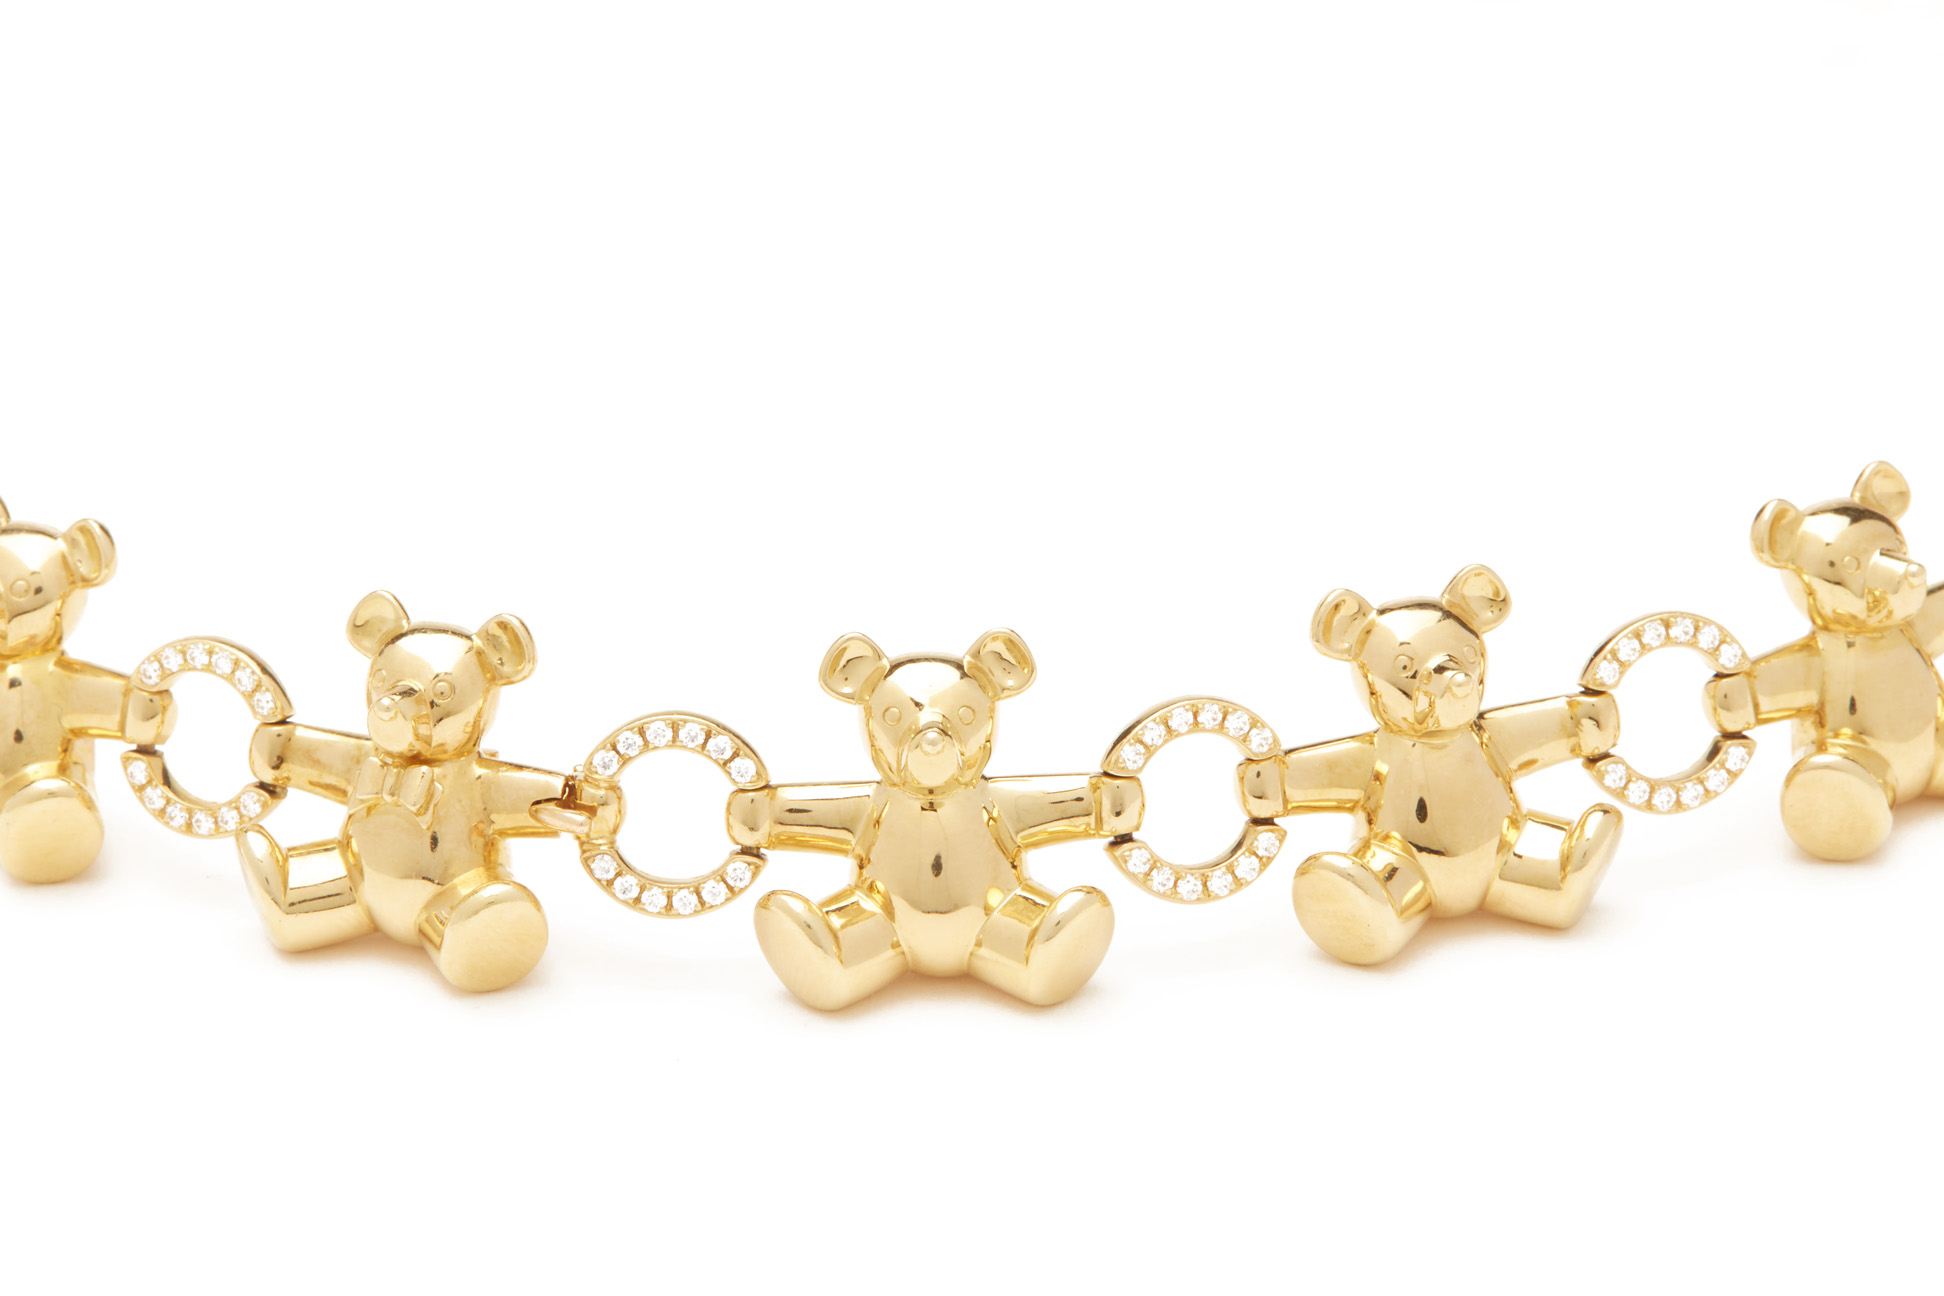 A GIMEL GOLD AND DIAMOND BEAR NECKLACE - Image 4 of 4